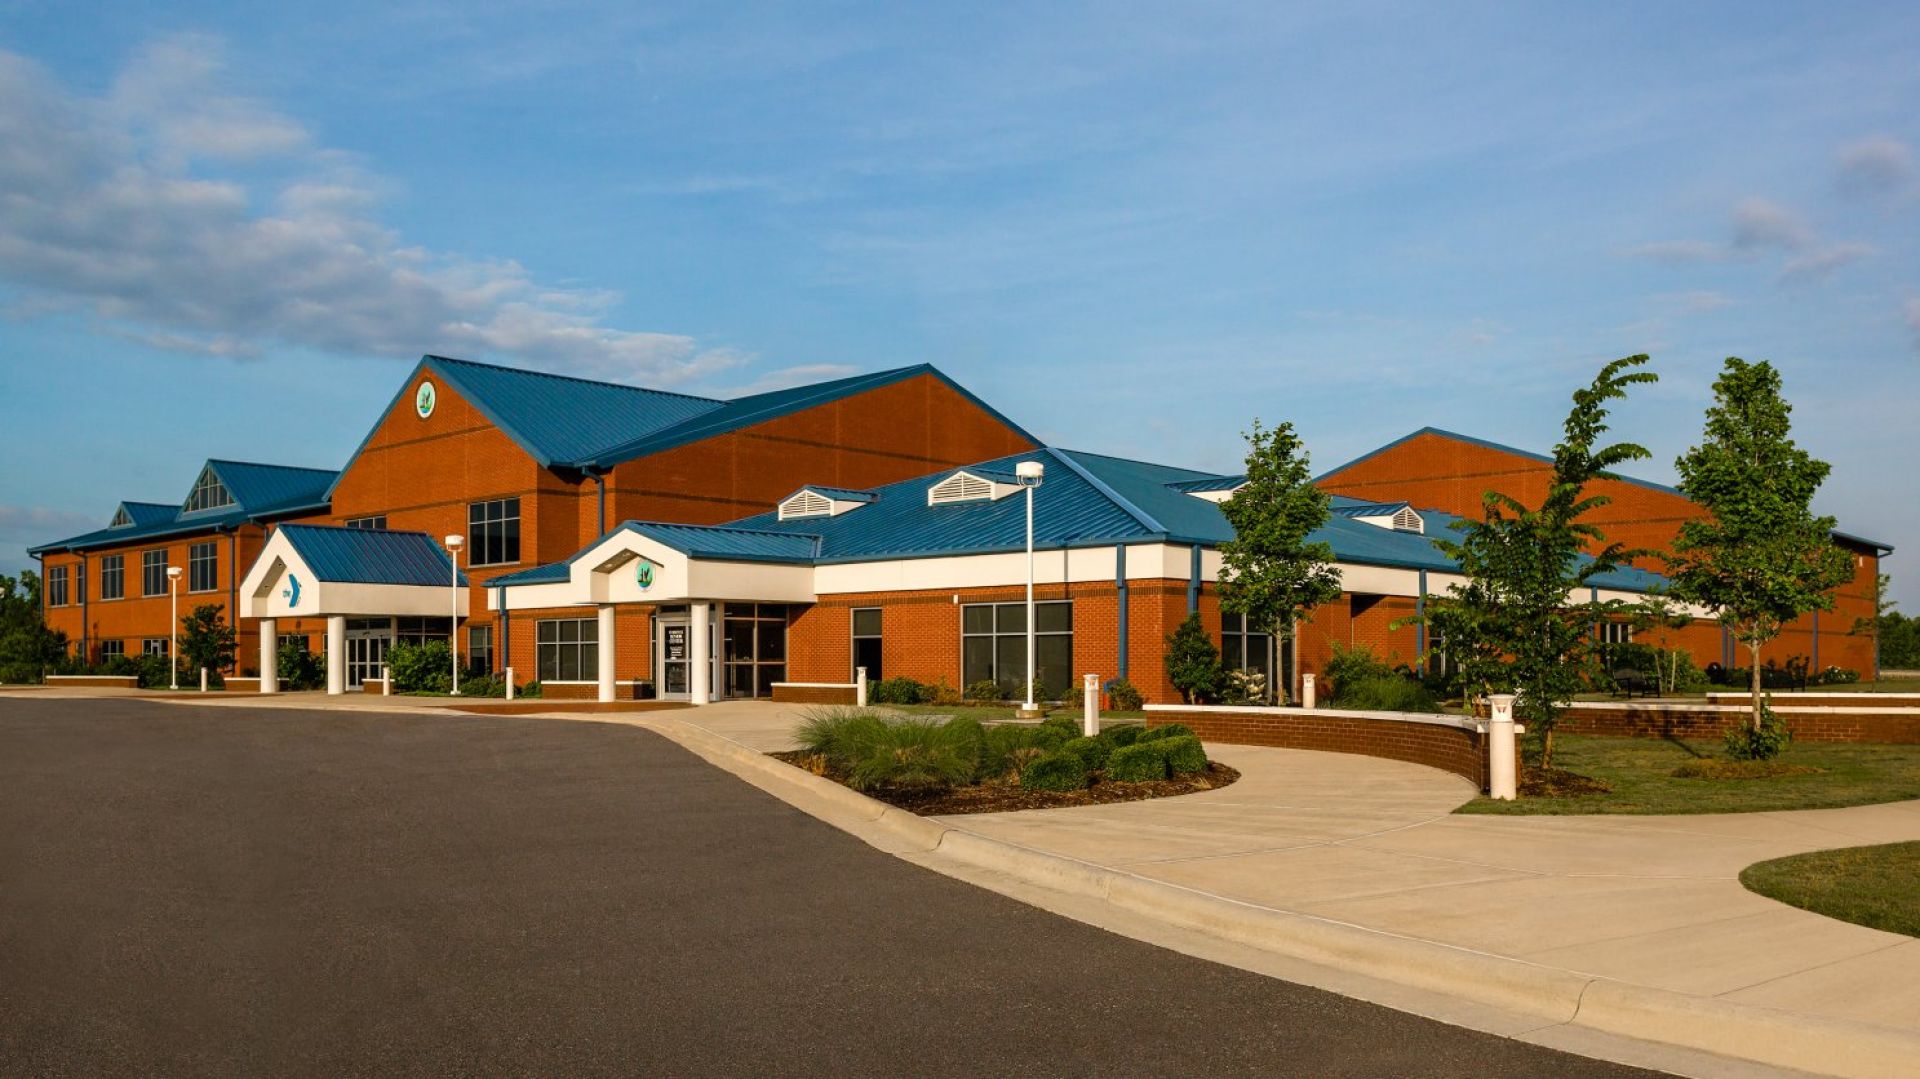 The Currituck Family YMCA